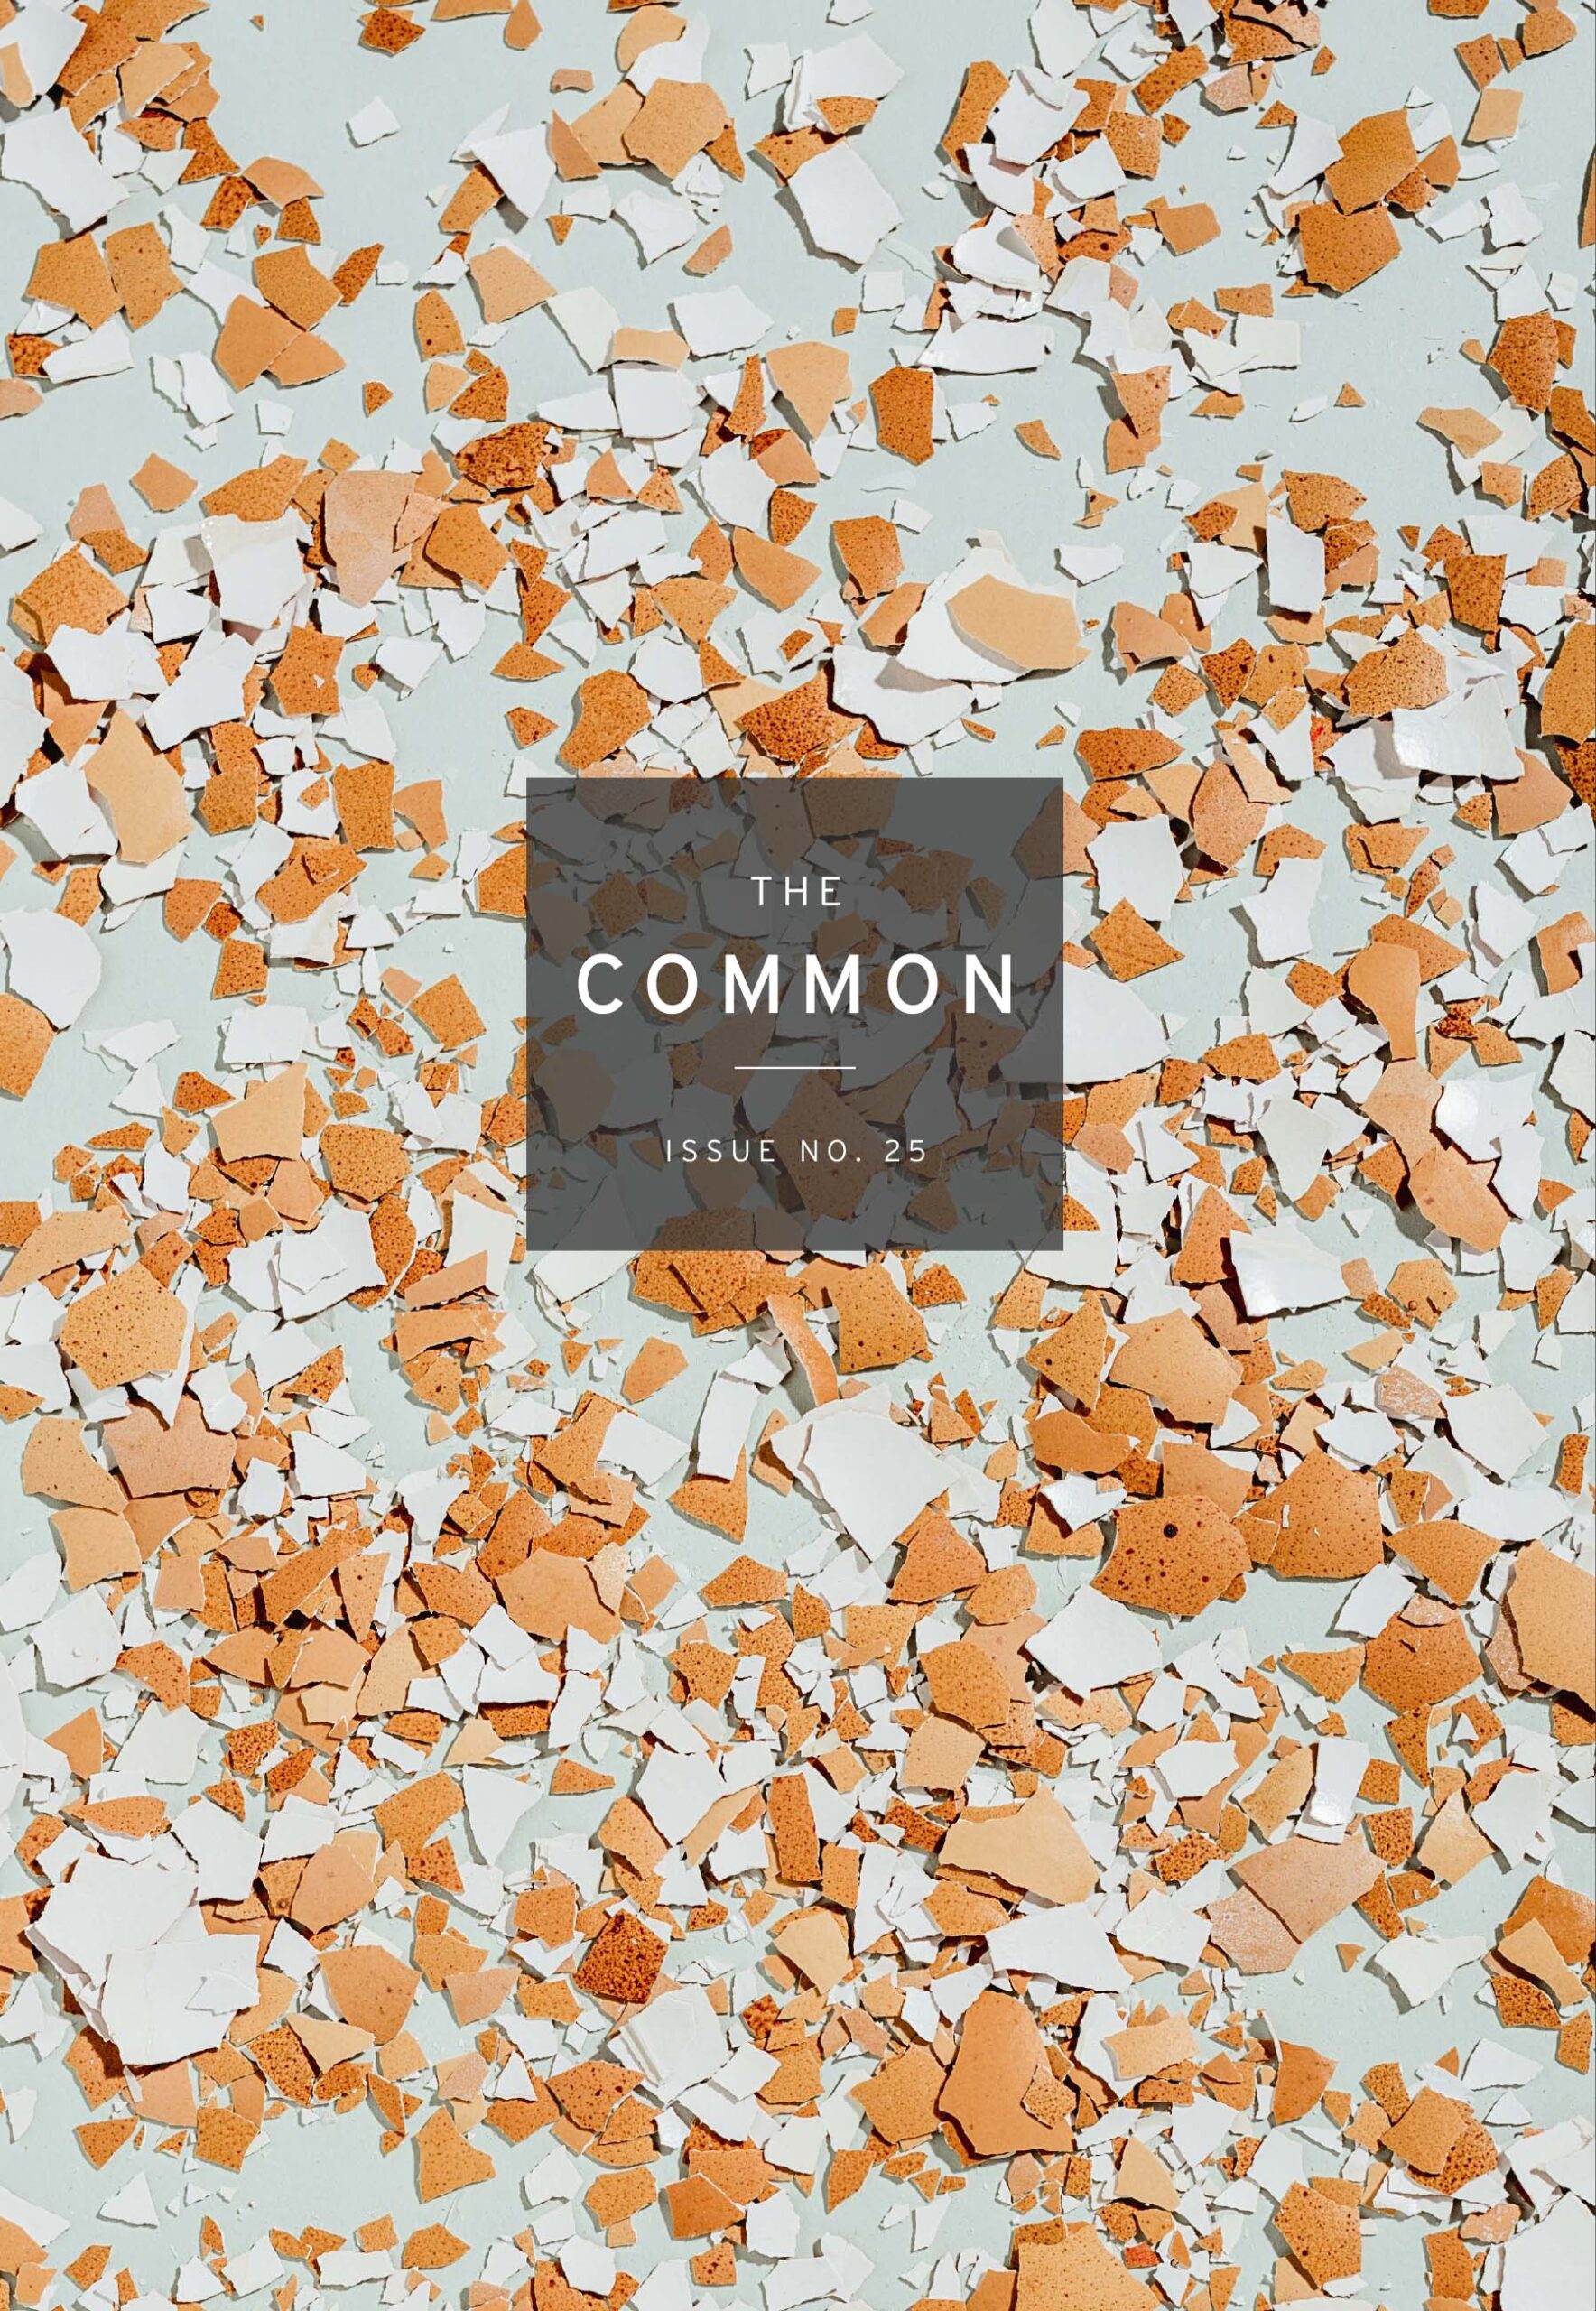 Issue 25 cover: The Common's square dark logo over a scattering of smashed brown and white egg shells, on a pale blue background.